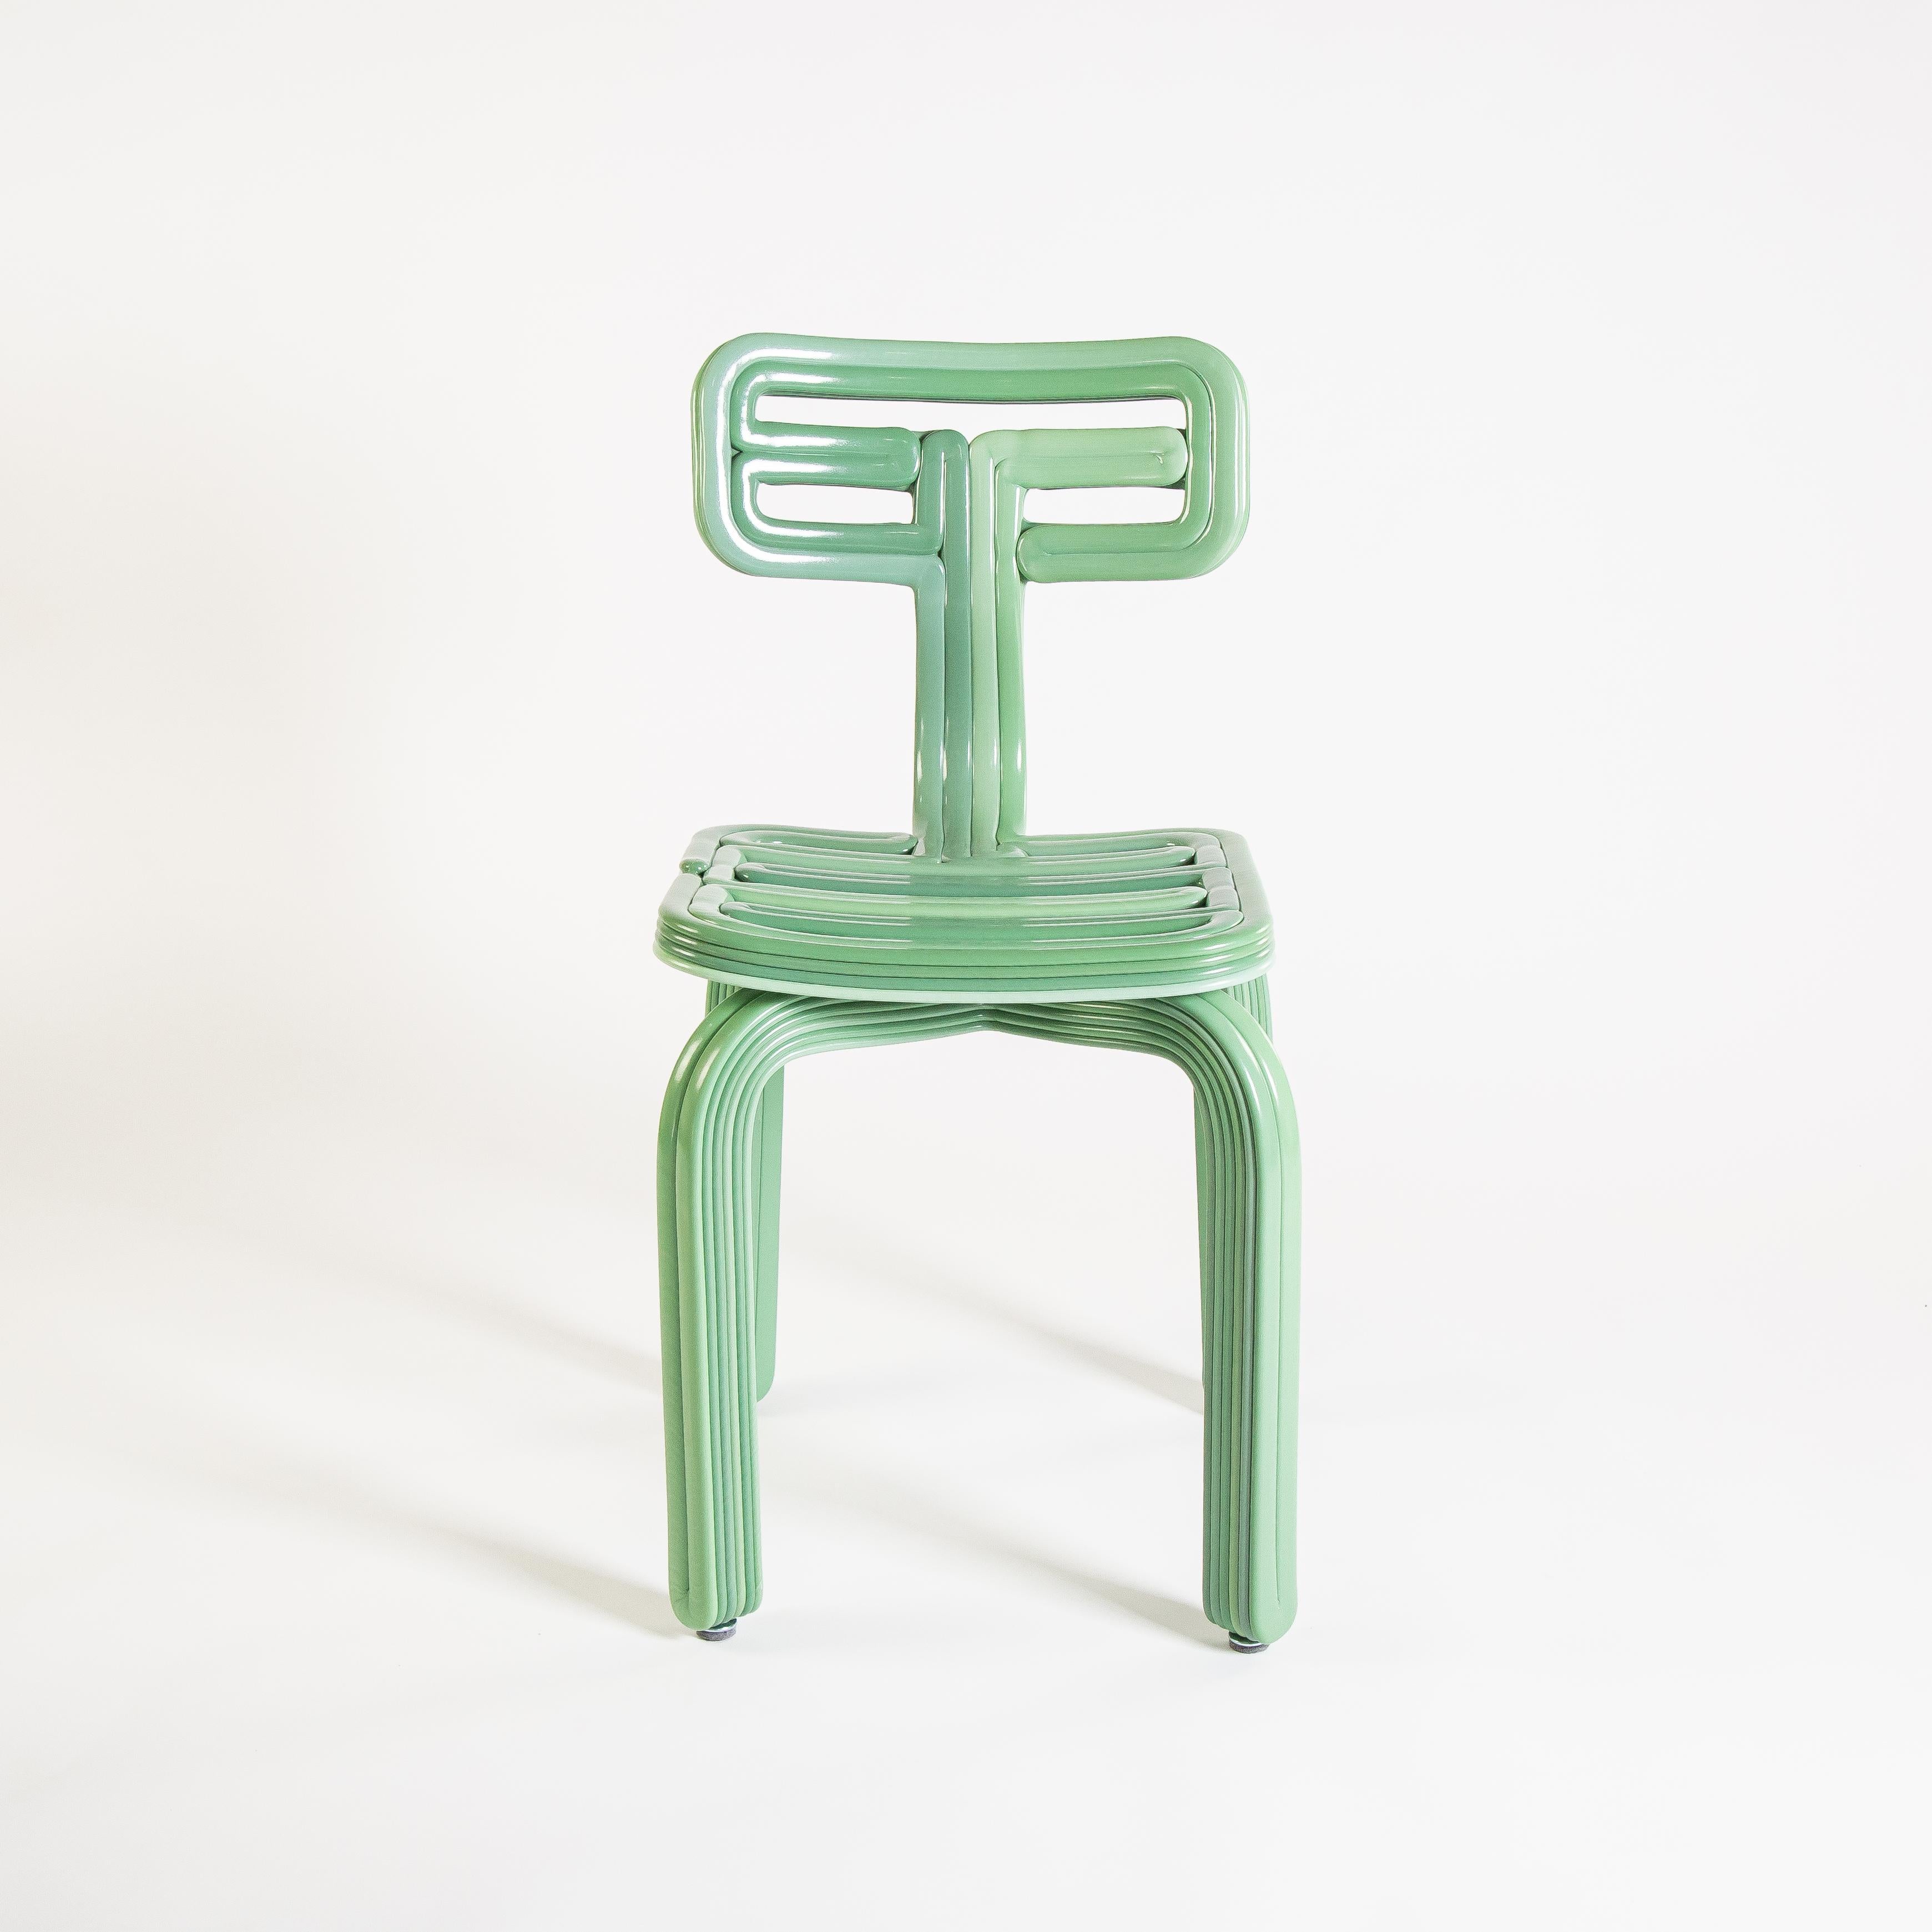 From Dirk Van Der Kooij’s exceptional range. The Chubby chair is a 3D printed chair in Kooij’s playful style. The Chubby is printed from 10kg of chipped, recycled fridge interiors. Or, more poetically, one standard fridge.